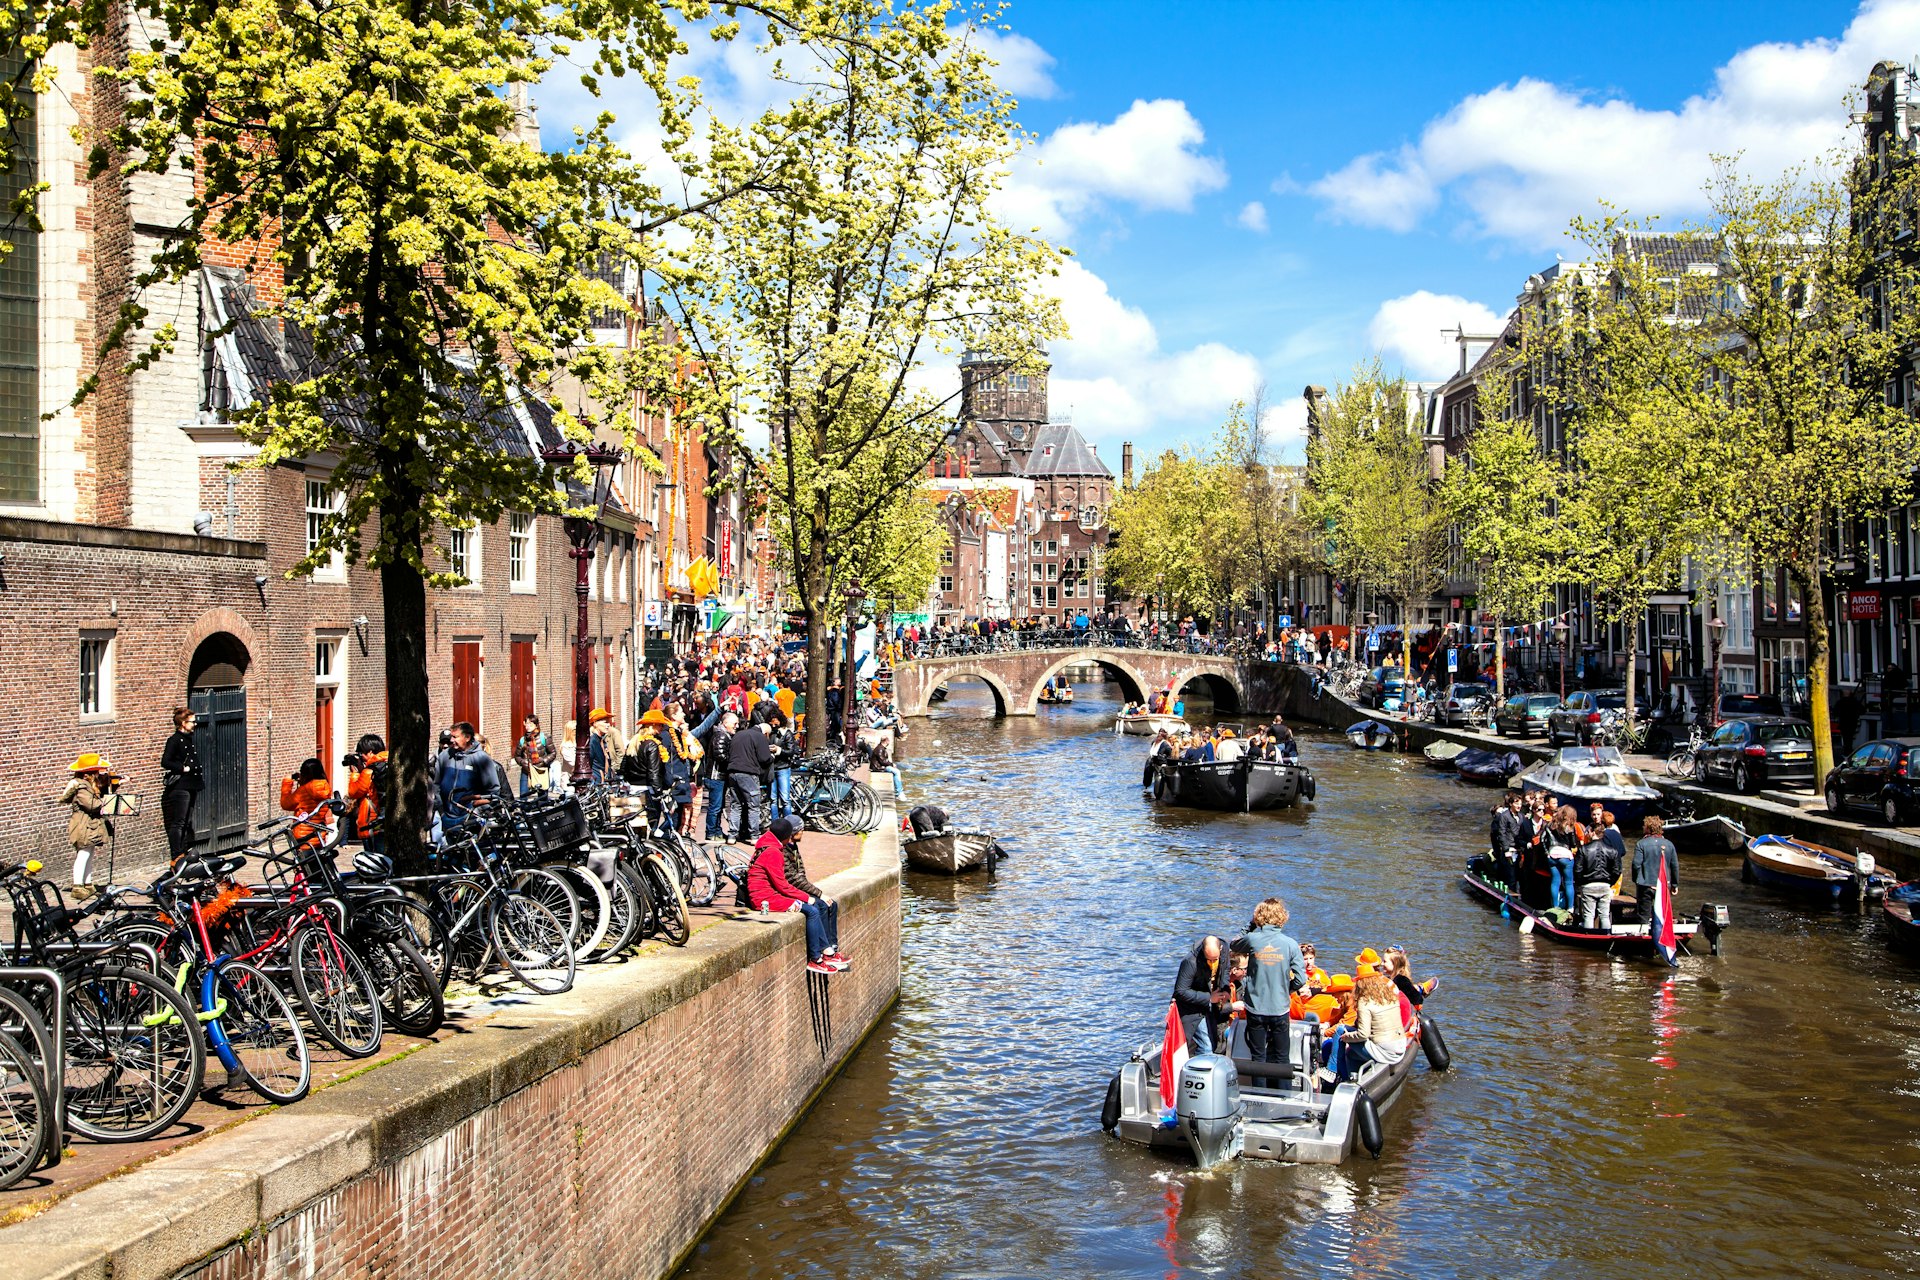 One of Amsterdam's central canals in the summer months. Boats full of people move through the water while the surrounding streets are thronged with people and bicycles.